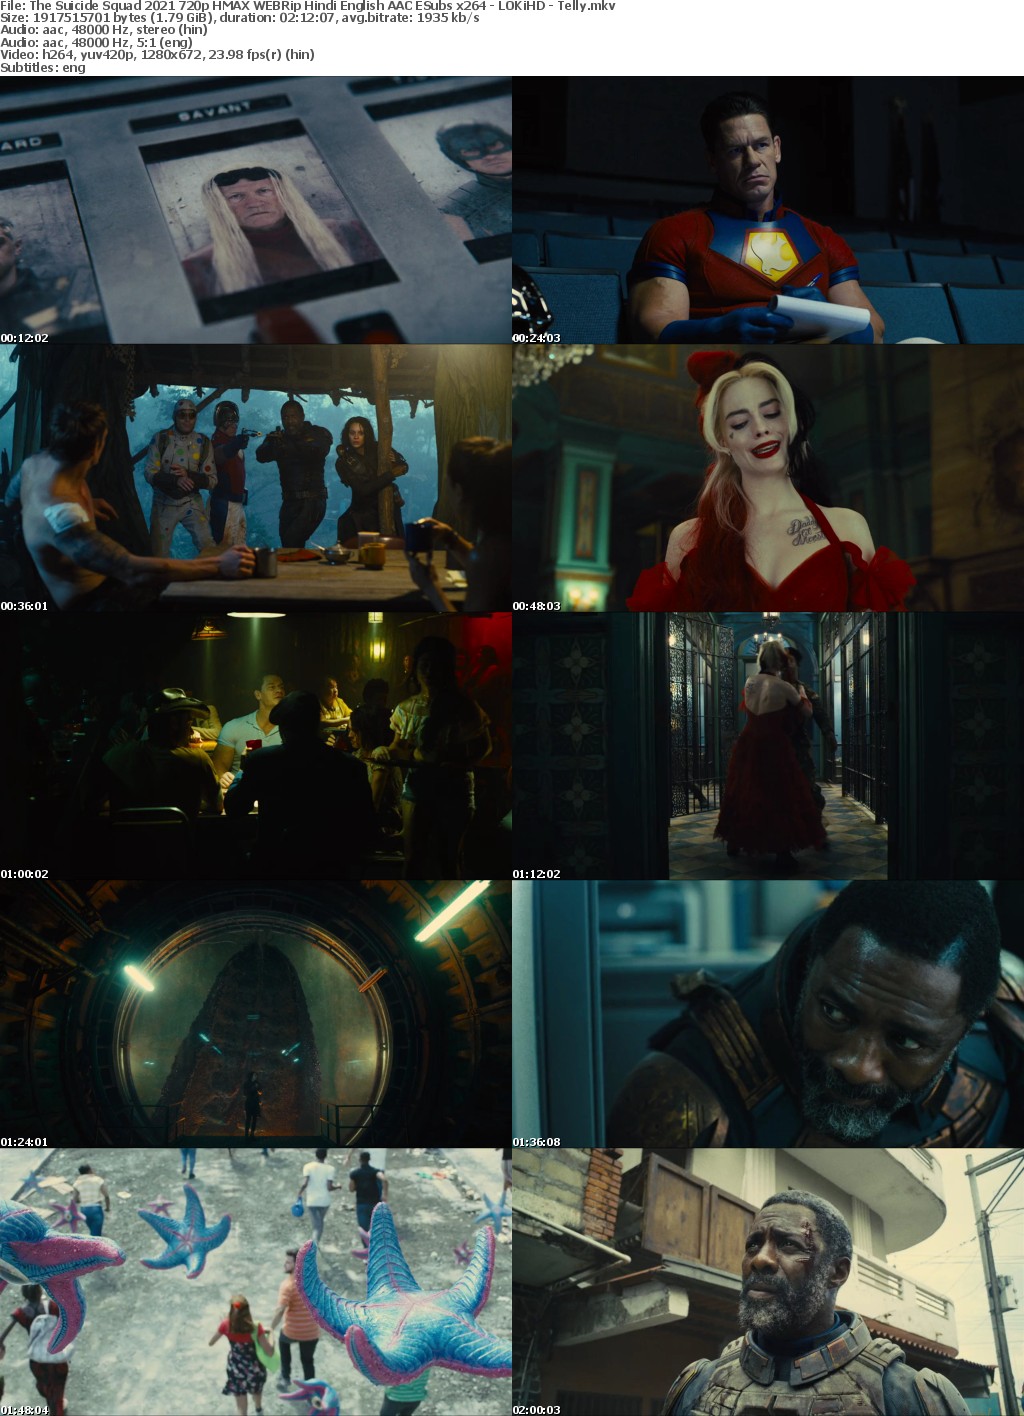 The Suicide Squad 2021 720p HMAX WEBRip Hindi English AAC ESubs x264 - LOKiHD - Telly mkv